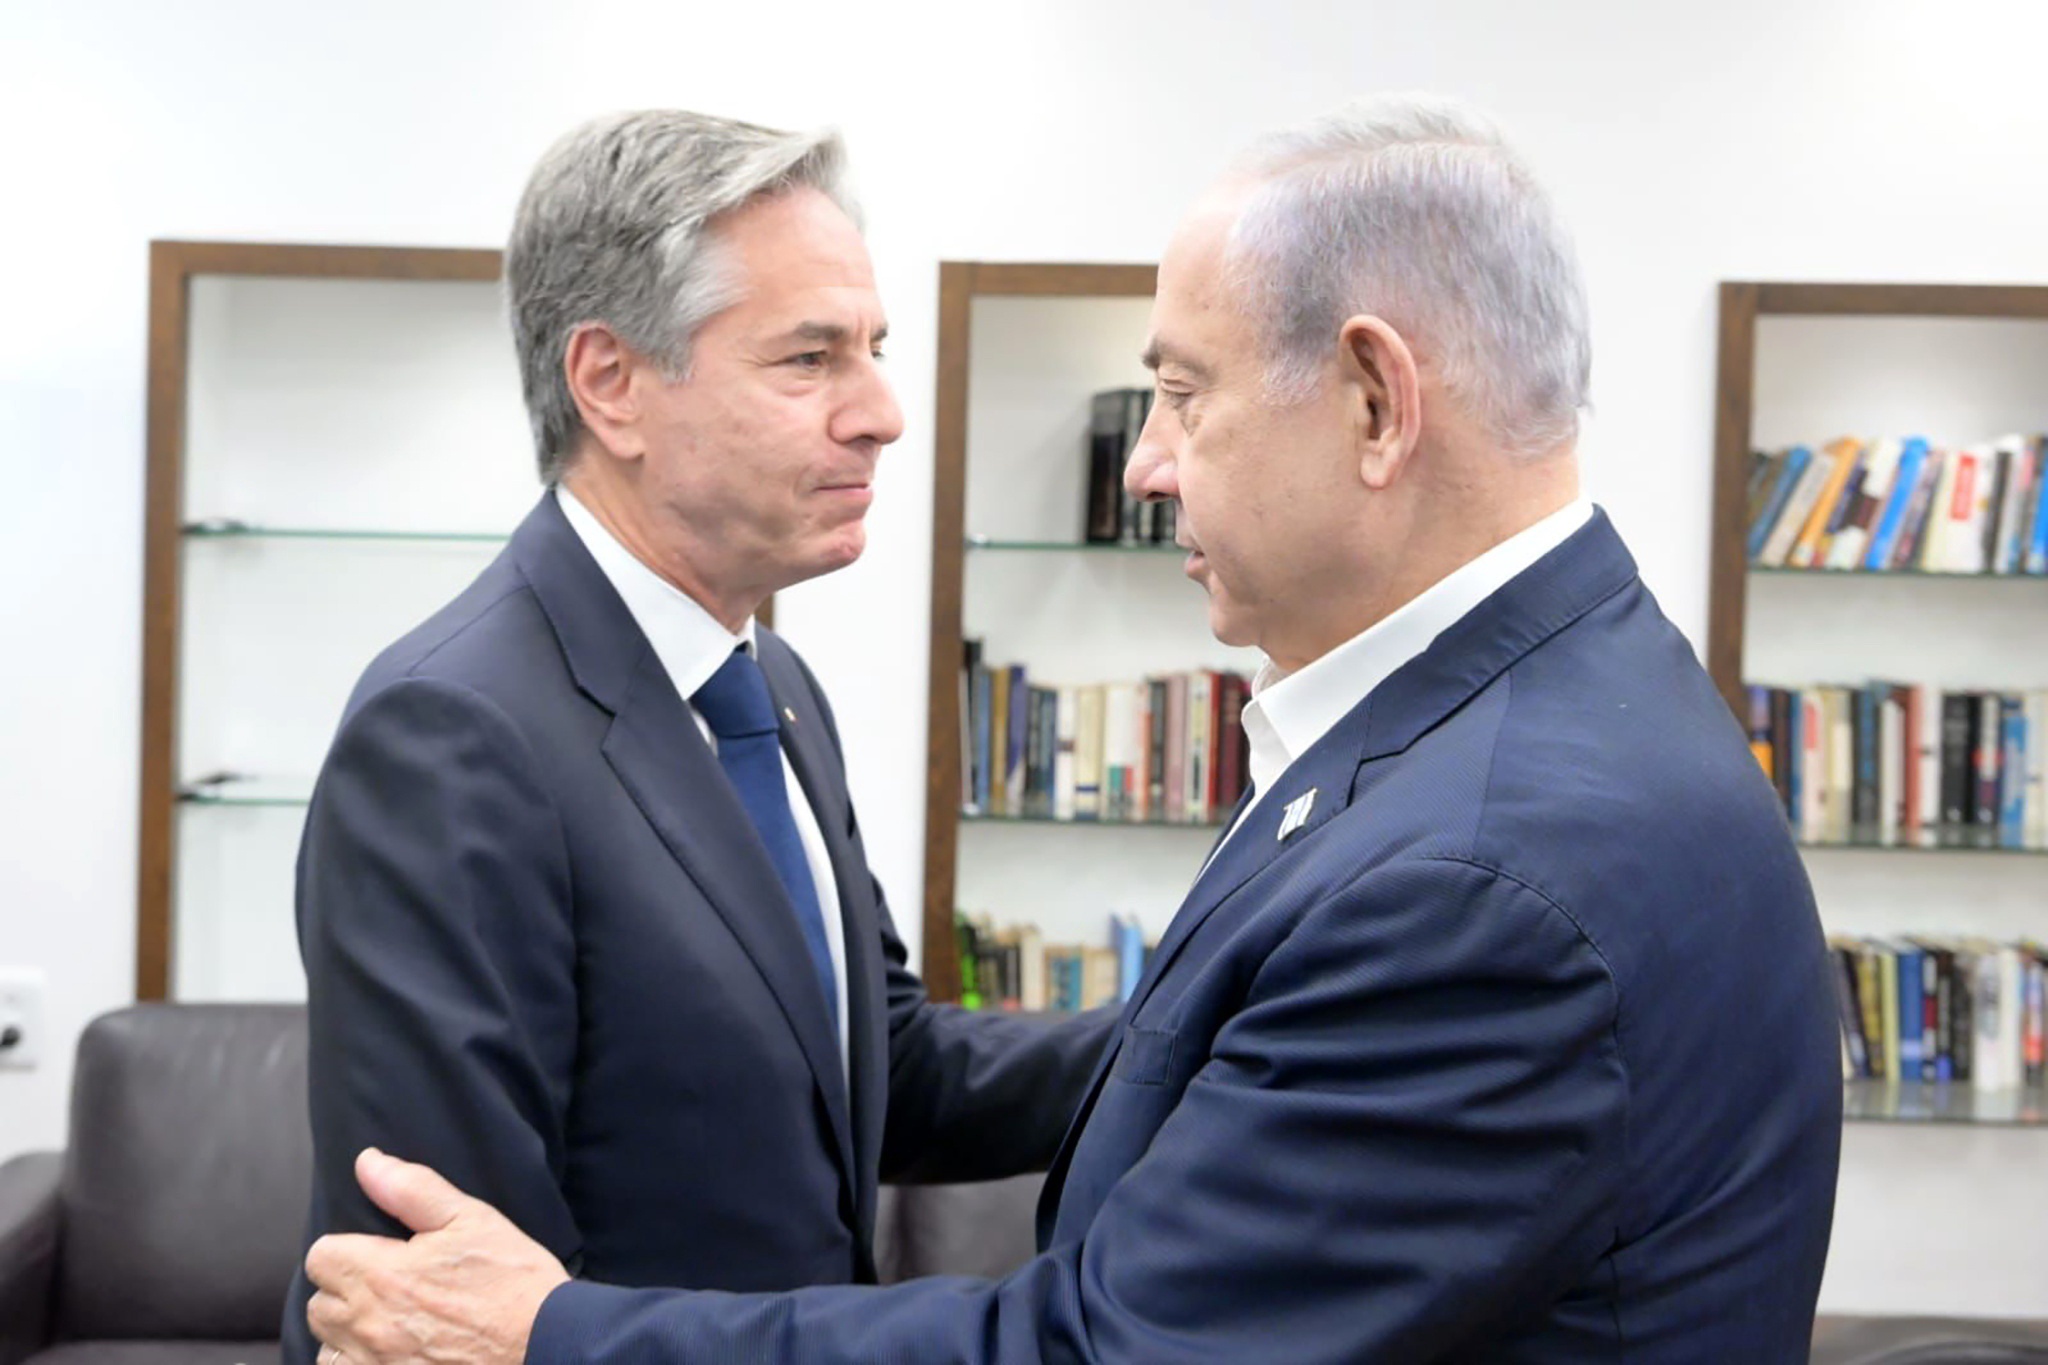 US Secretary of State Anthony Blinken's call for Israeli Prime Minister Benjamin Netanyahu to moderate the conflict does not appear to be succeeding, says Patrick Boulder, a security expert at The Hague Center for Strategic Studies (HCSS). 